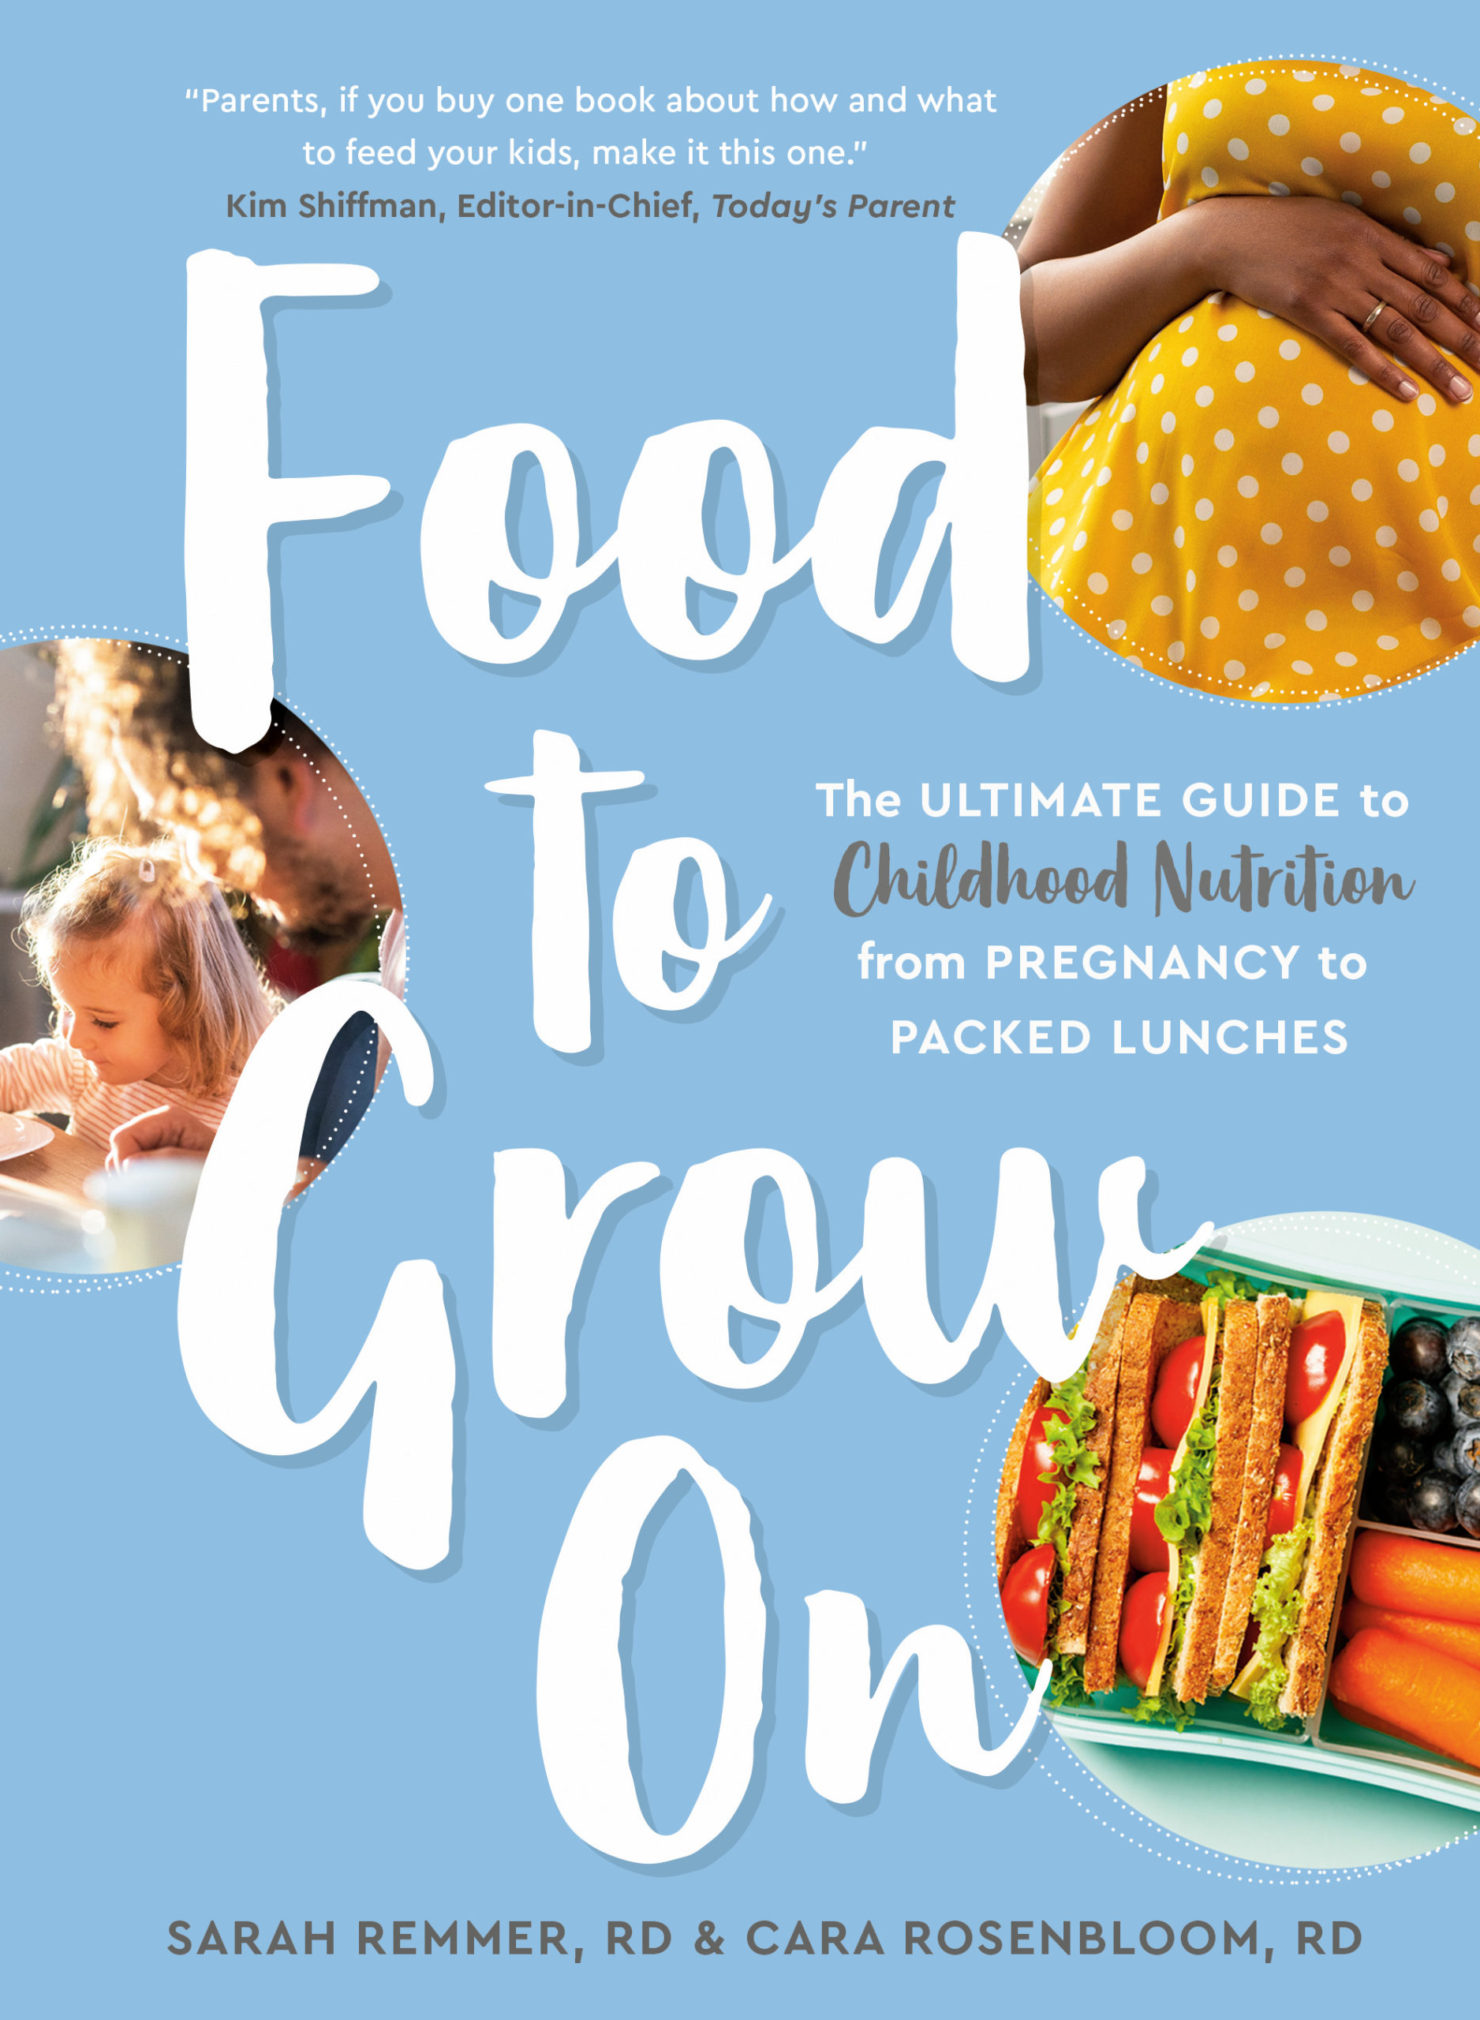 Food to Grow On: The Ultimate Guide to Childhood Nutrition from Pregnancy to Packed Lunches